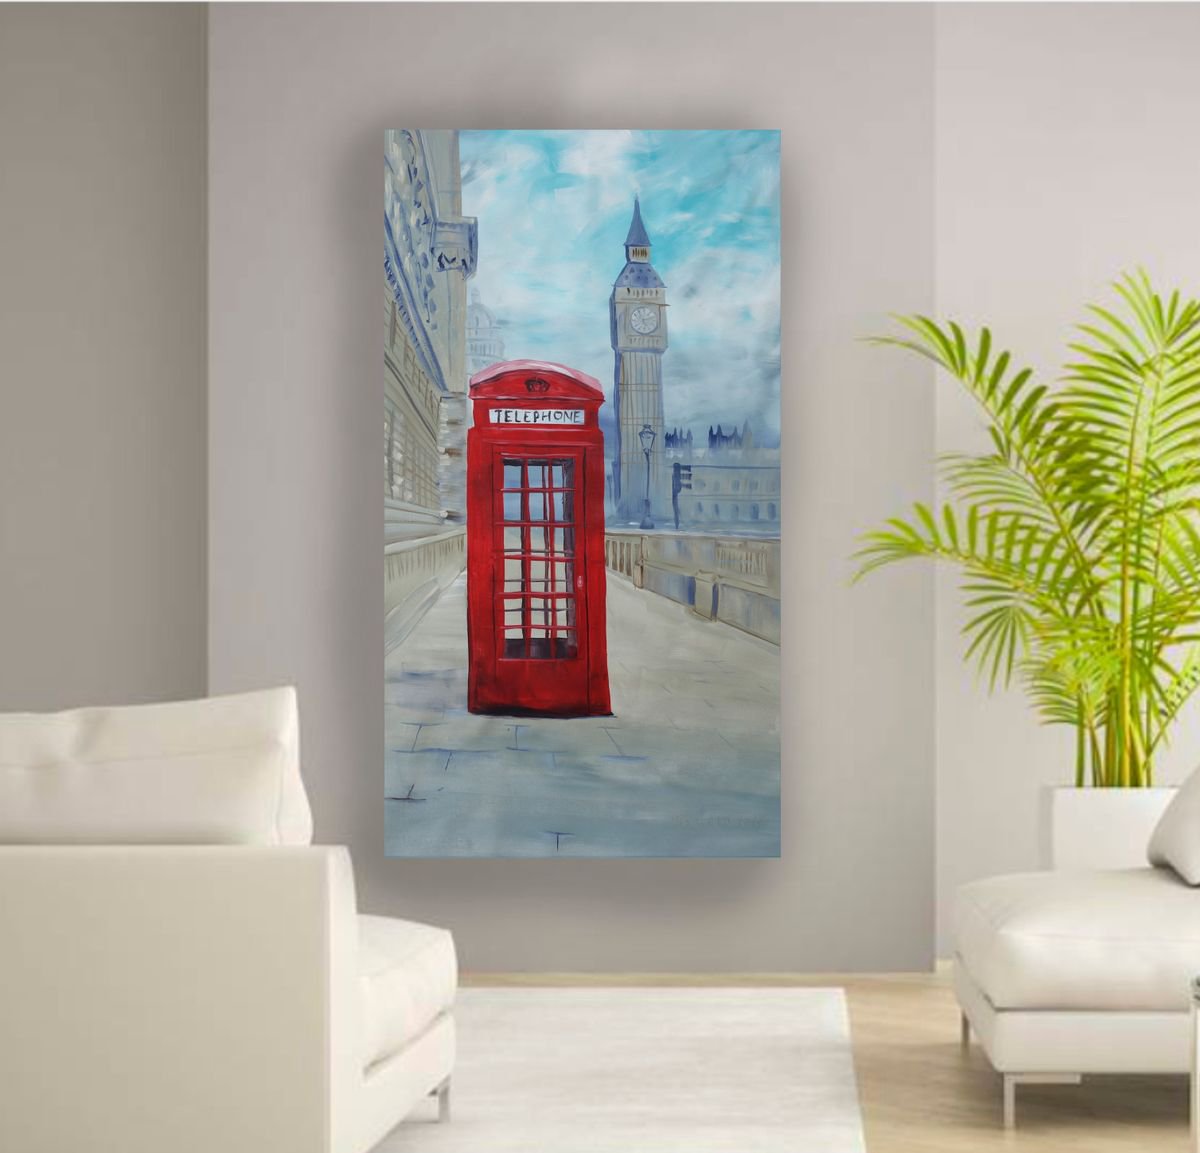 London red telephone box 90x160cm Big Ben S051 Palace of Westminster Large impressionism a... by Ksavera